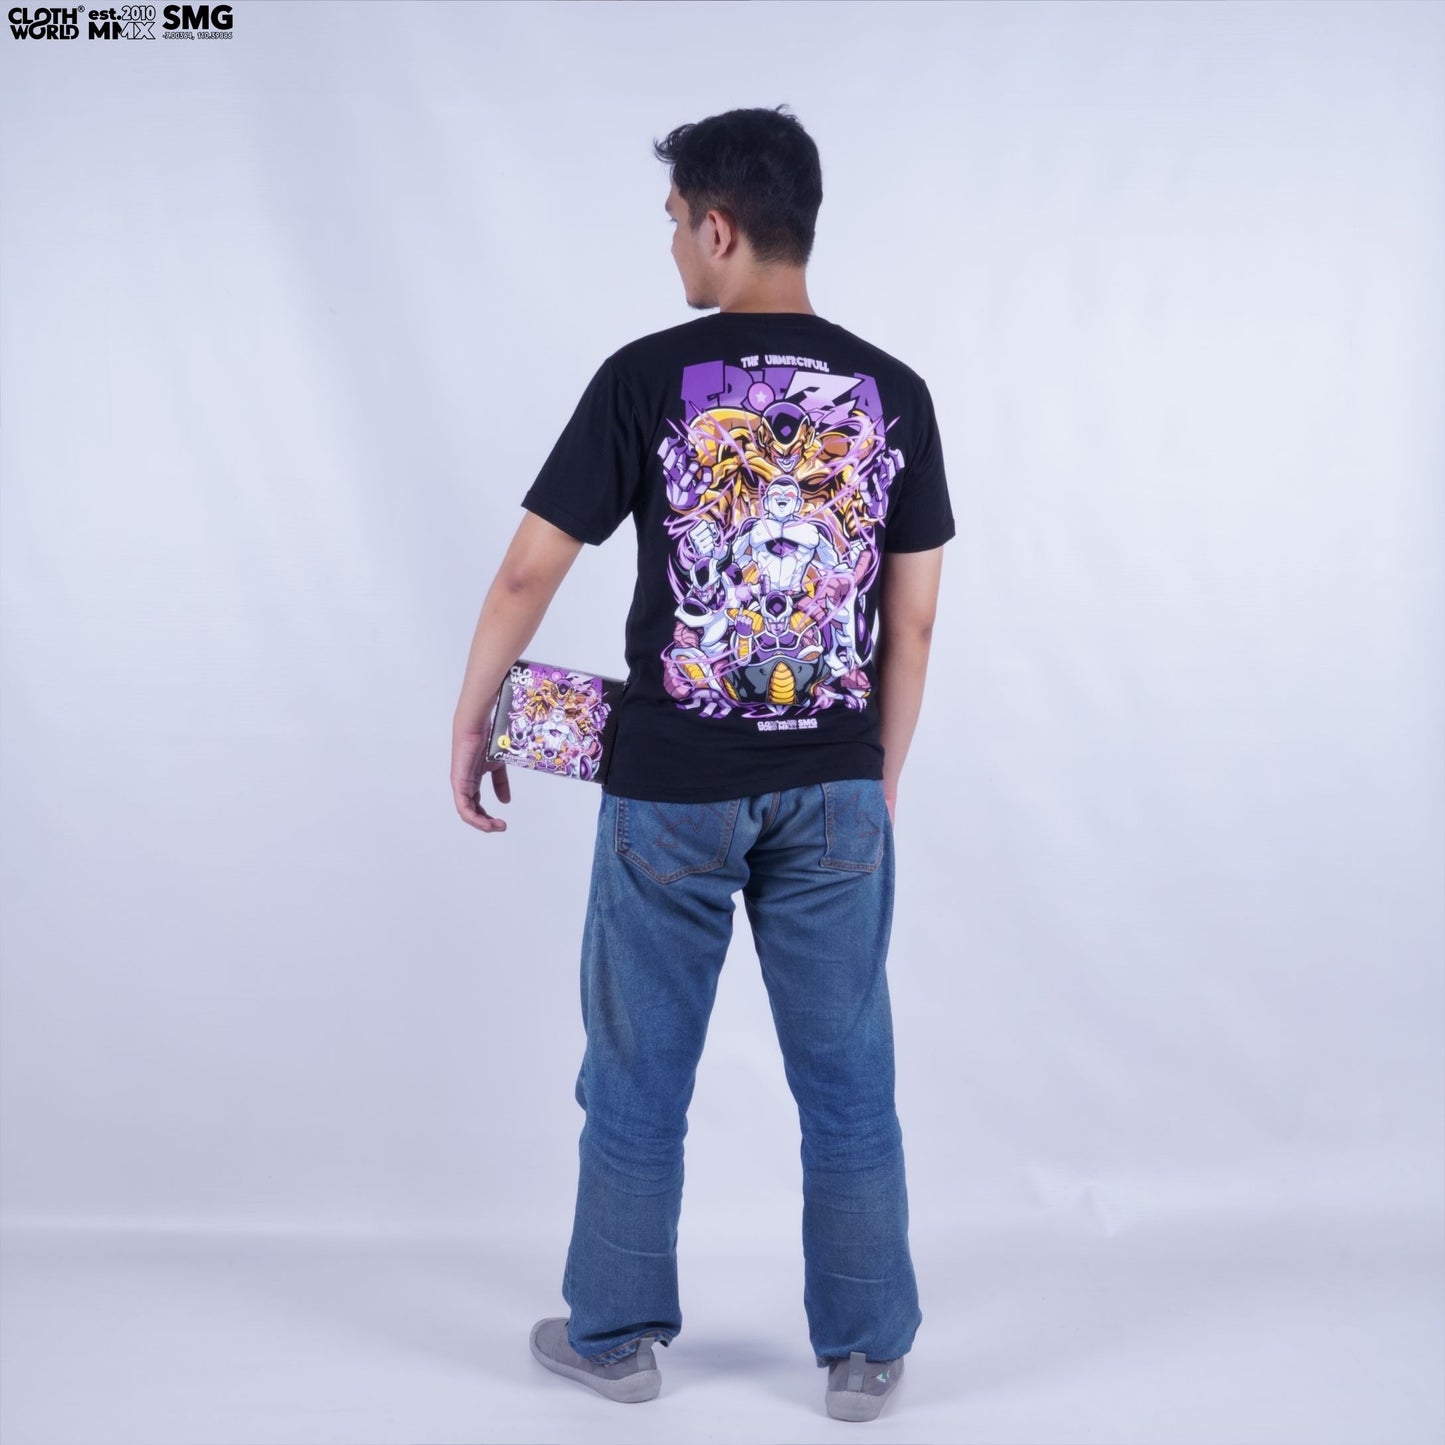 Frieza All Forms T-Shirt